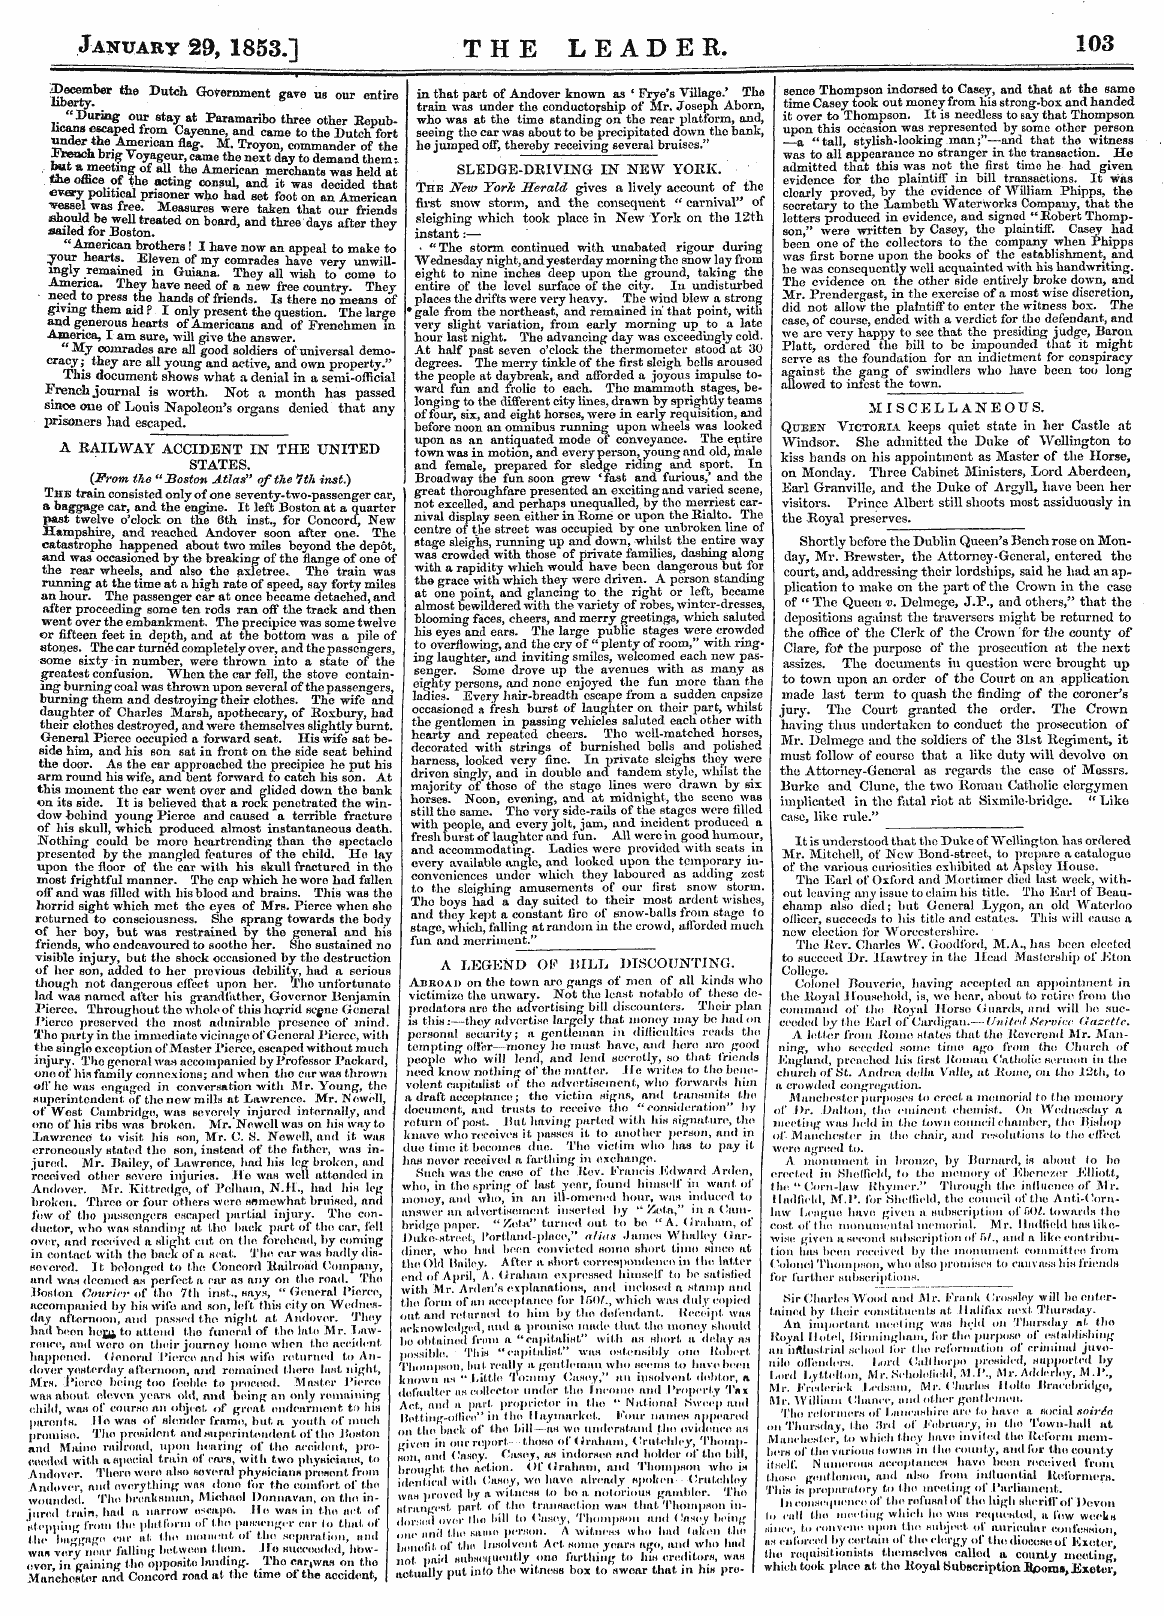 Leader (1850-1860): jS F Y, Country edition - January 29, 1853.] The Leader. 103